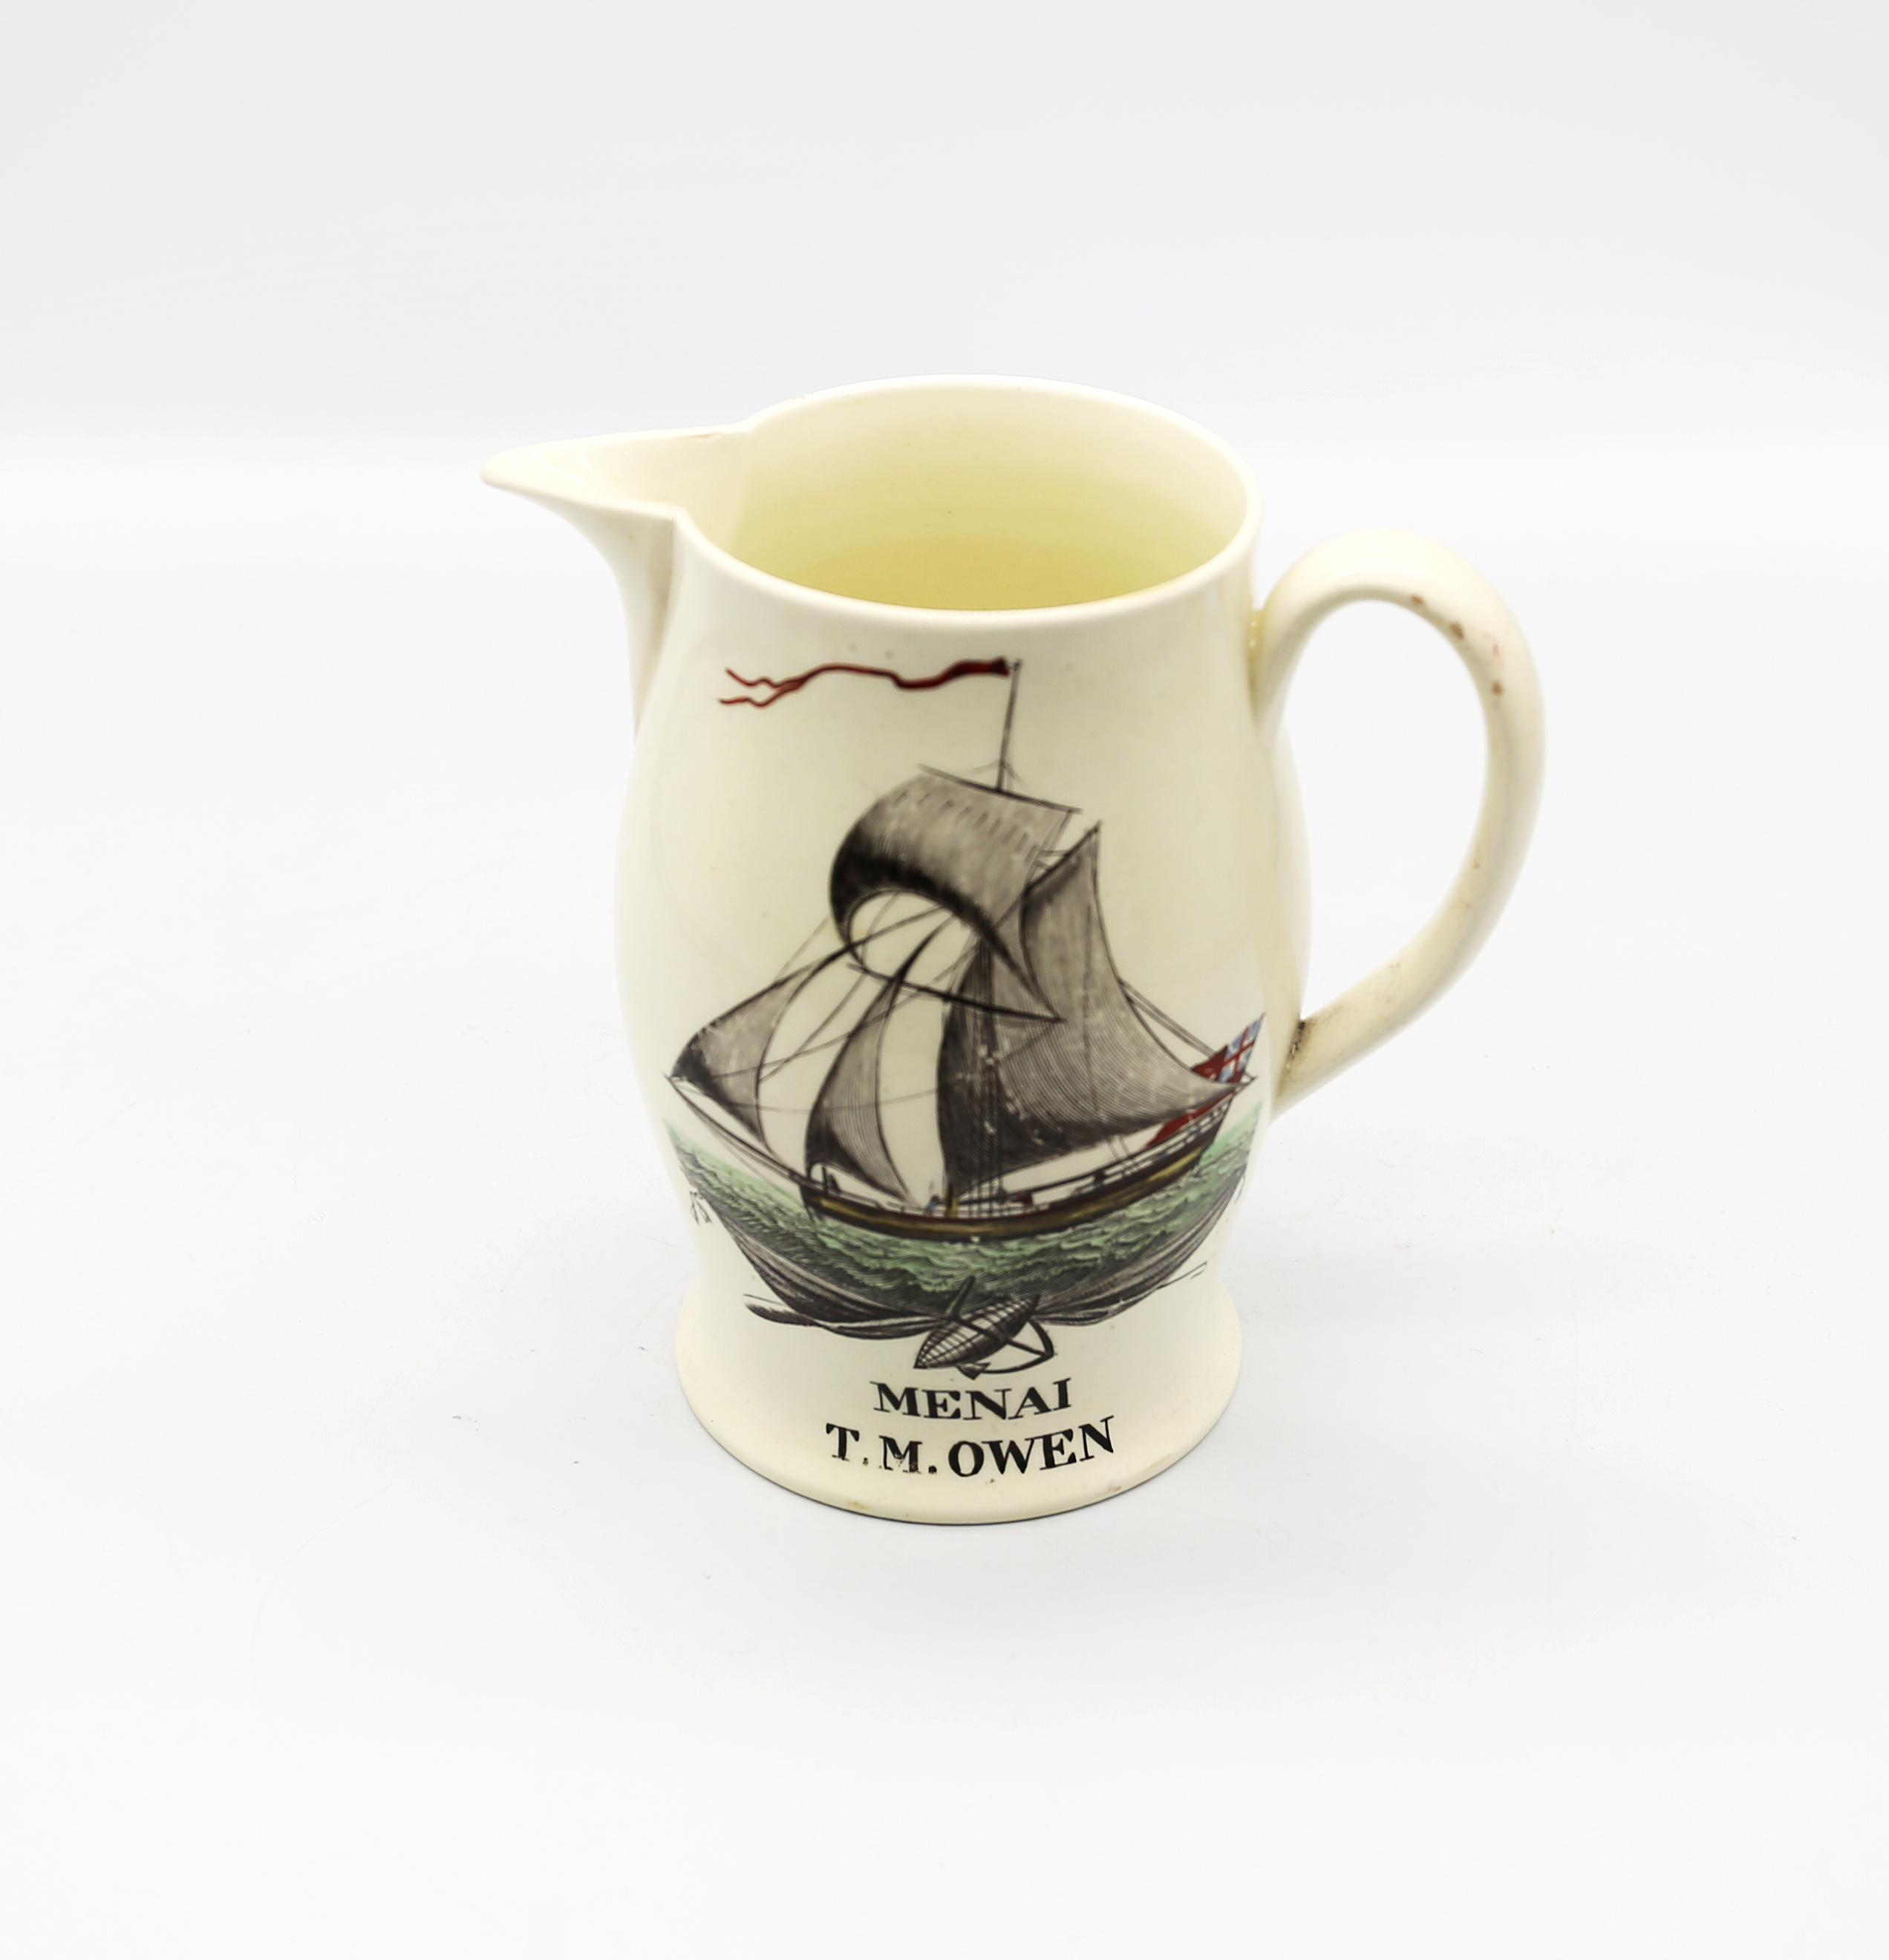 A Liverpool creamware jug, black transfer printed depicting a three masted sailing ship with the